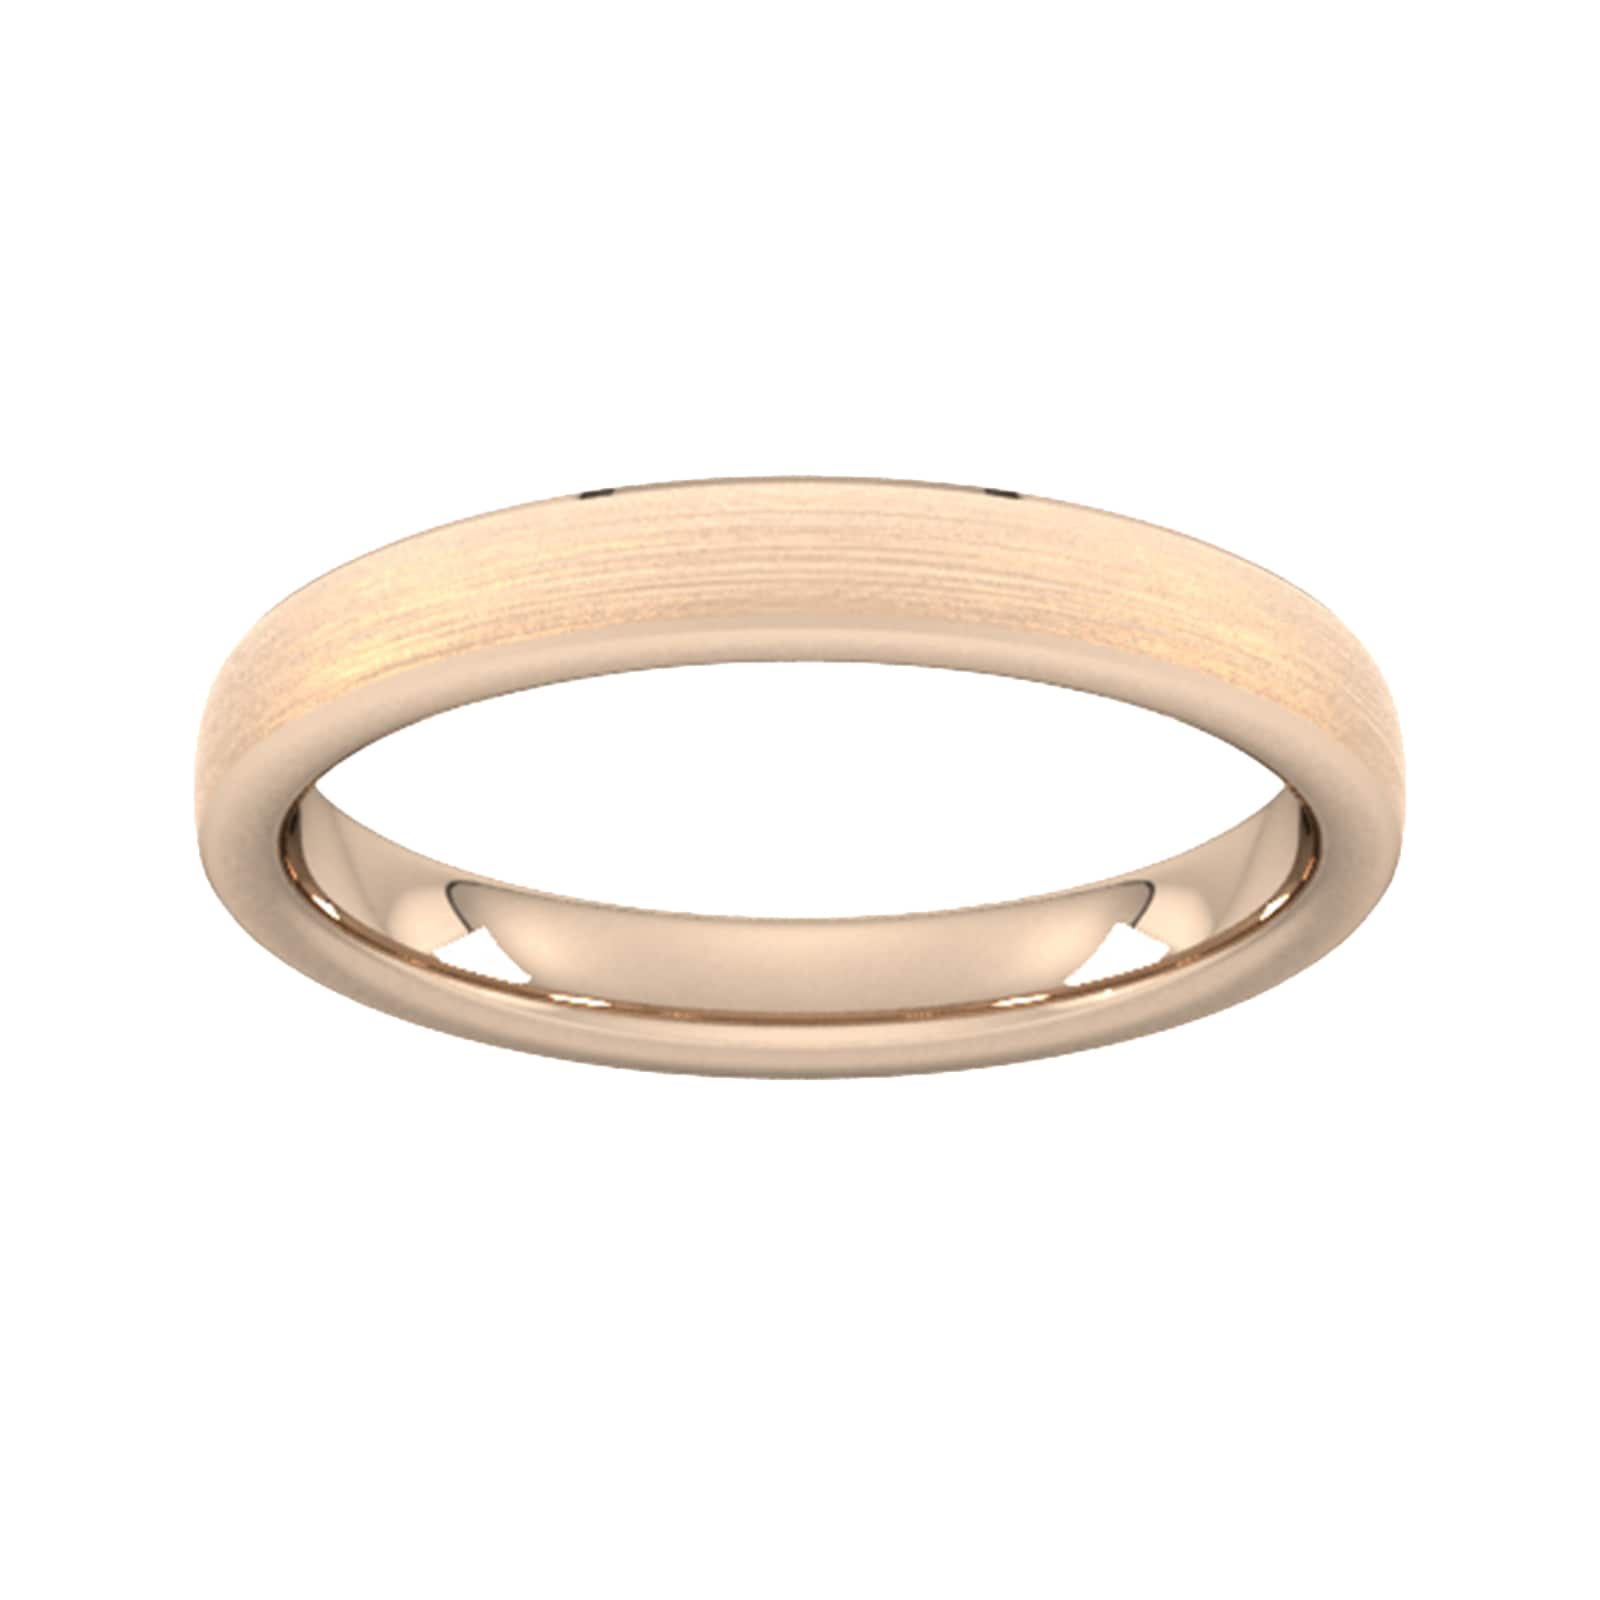 3mm Flat Court Heavy Polished Chamfered Edges With Matt Centre Wedding Ring In 9 Carat Rose Gold - Ring Size W